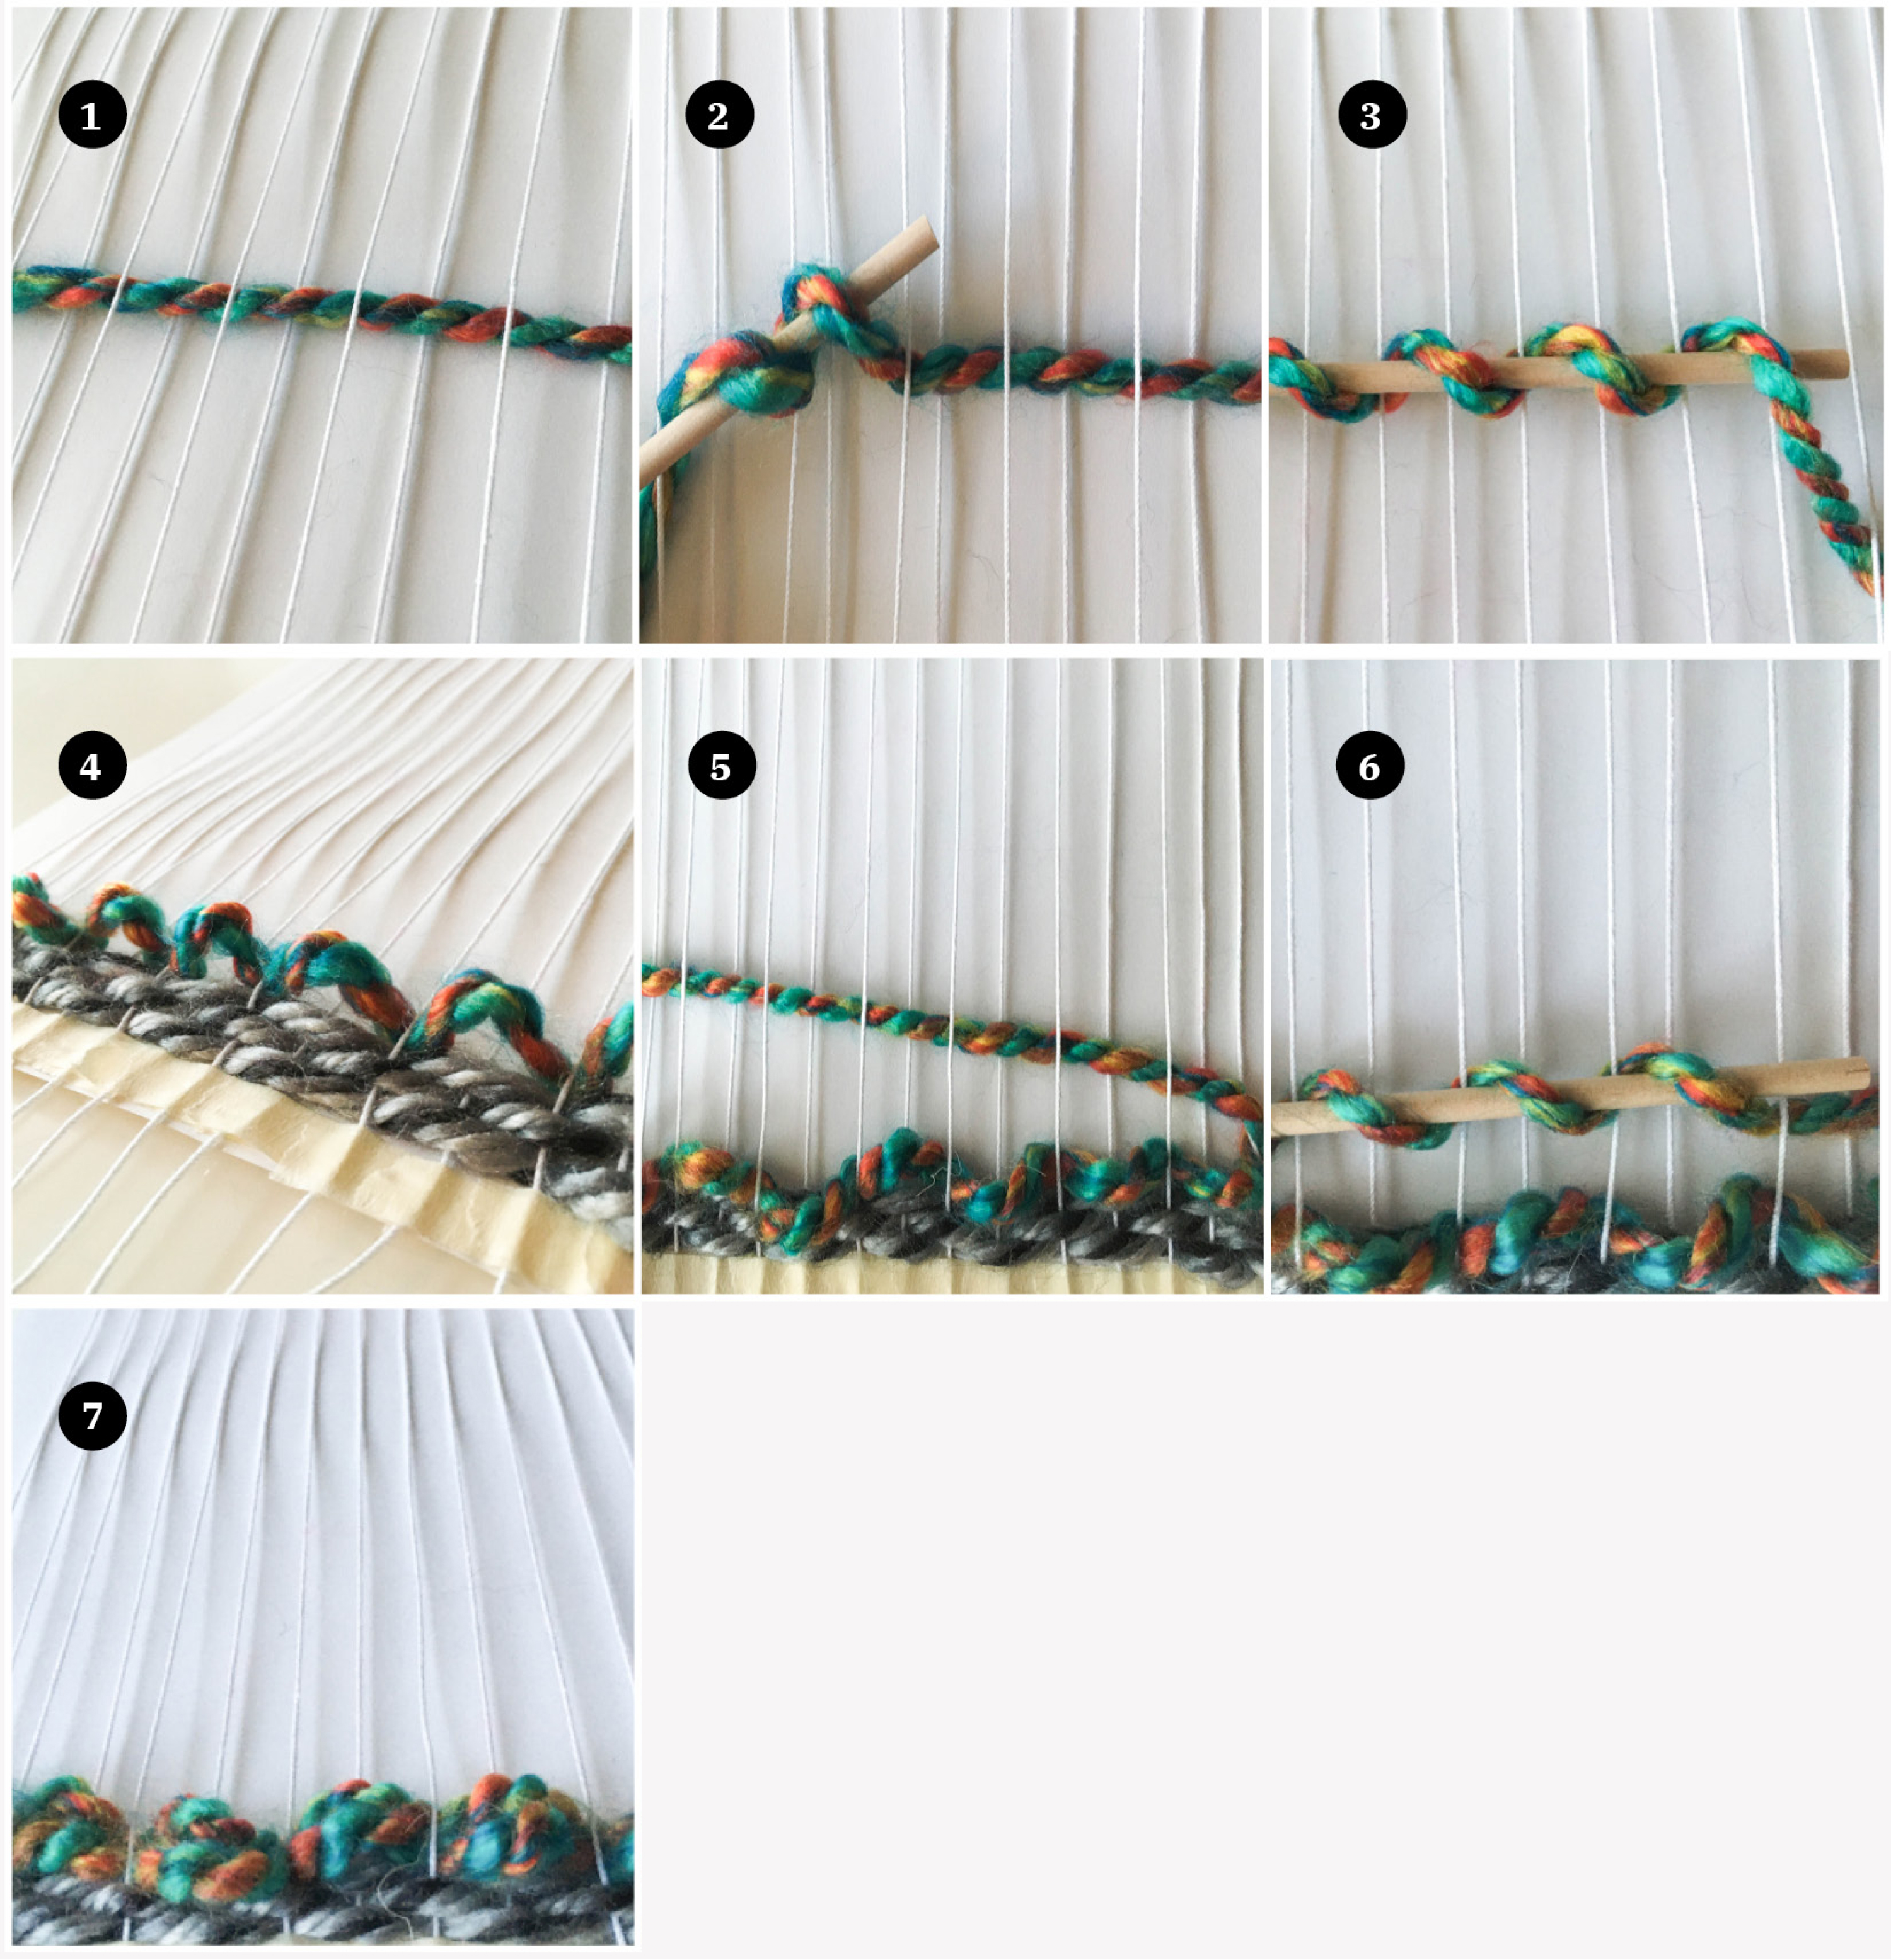 Composite of seven images showing various stages of weaving.